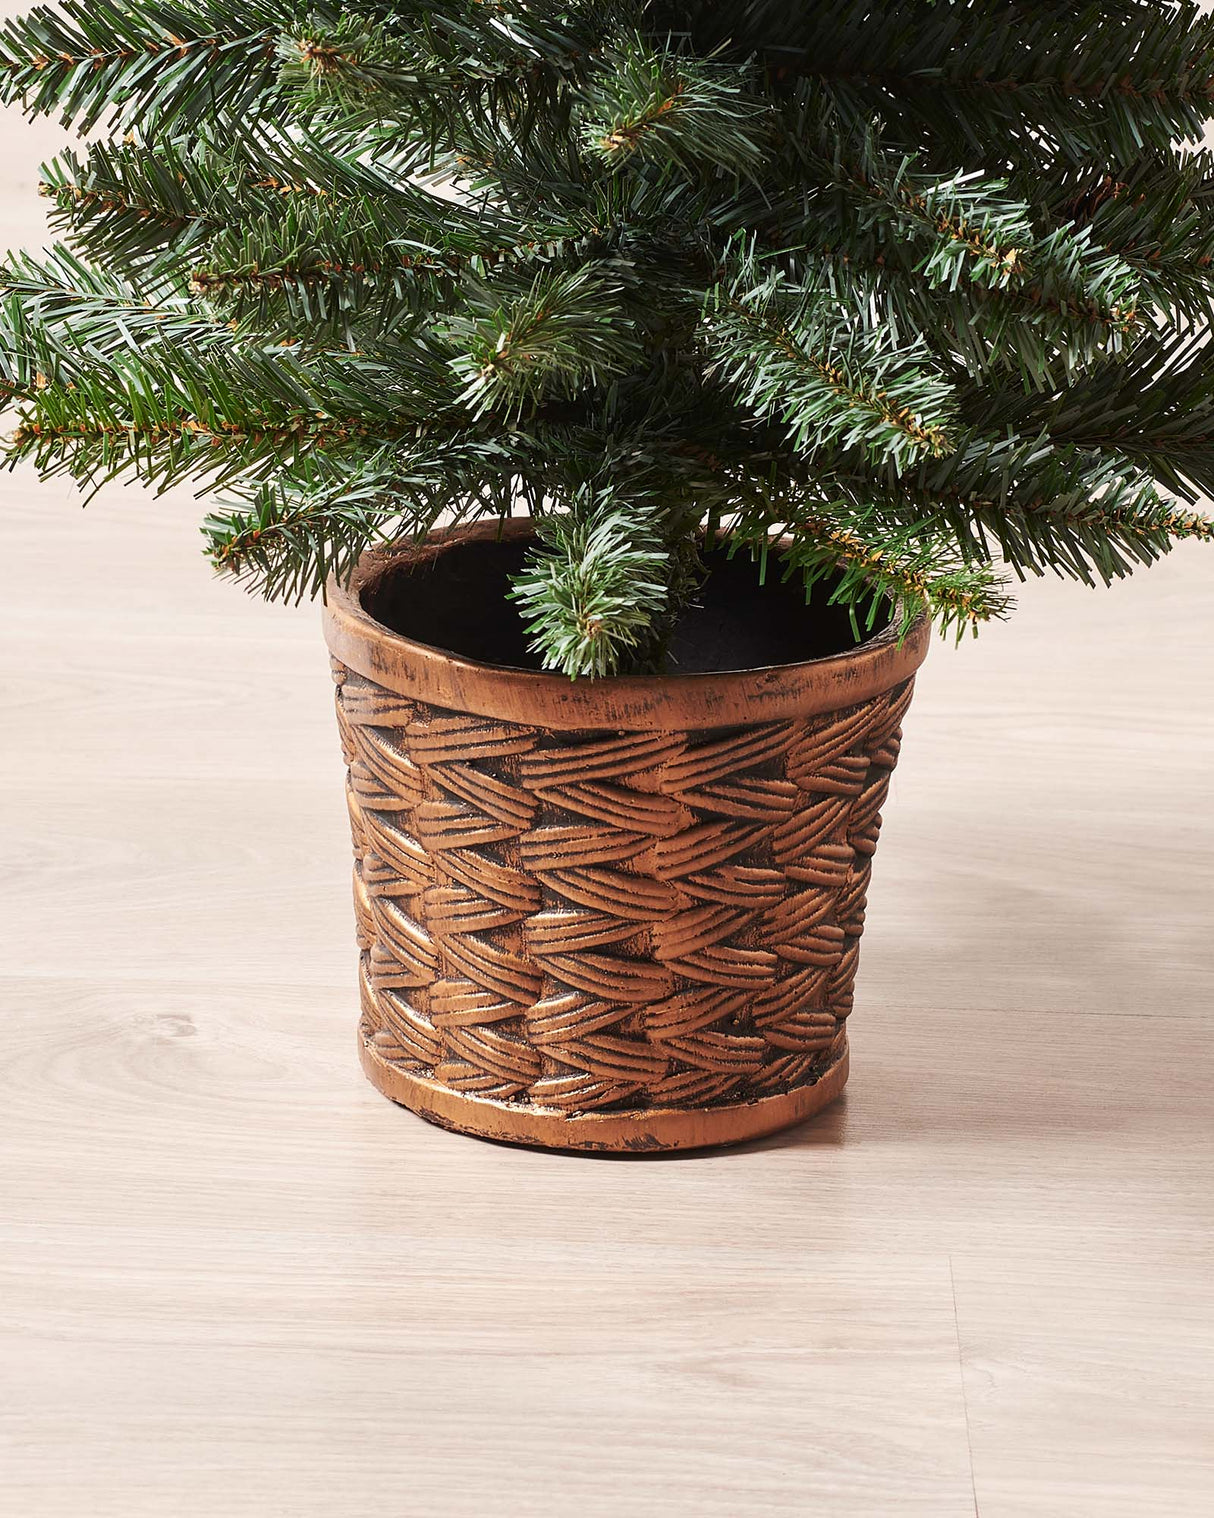 Potted Craford Blue Pine Decorated Christmas Tree, 3 ft